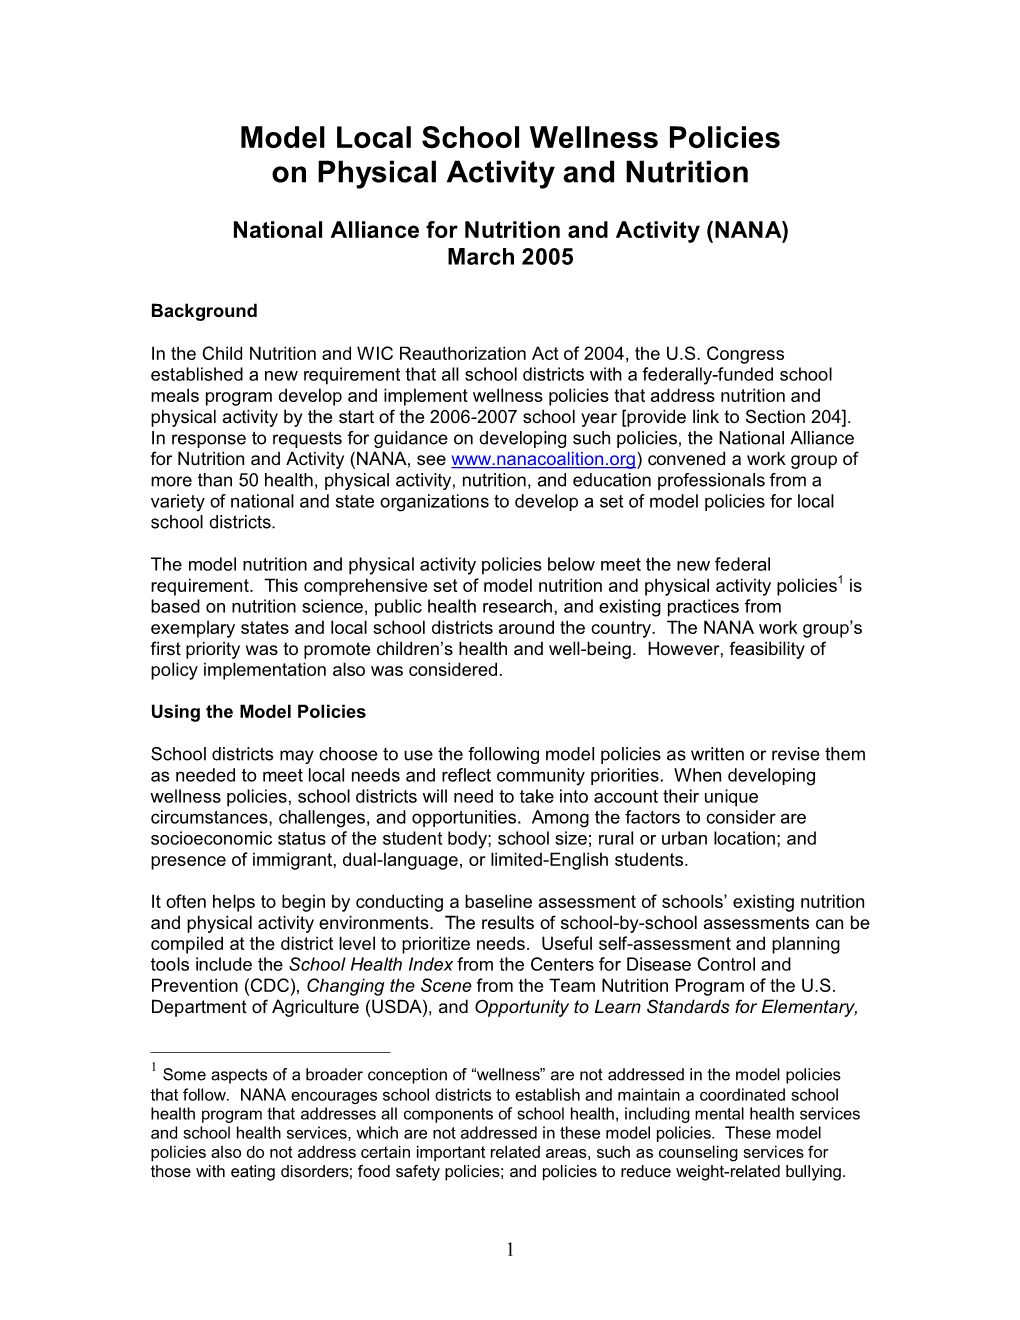 Model Local School Wellness Policies on Physical Activity and Nutrition